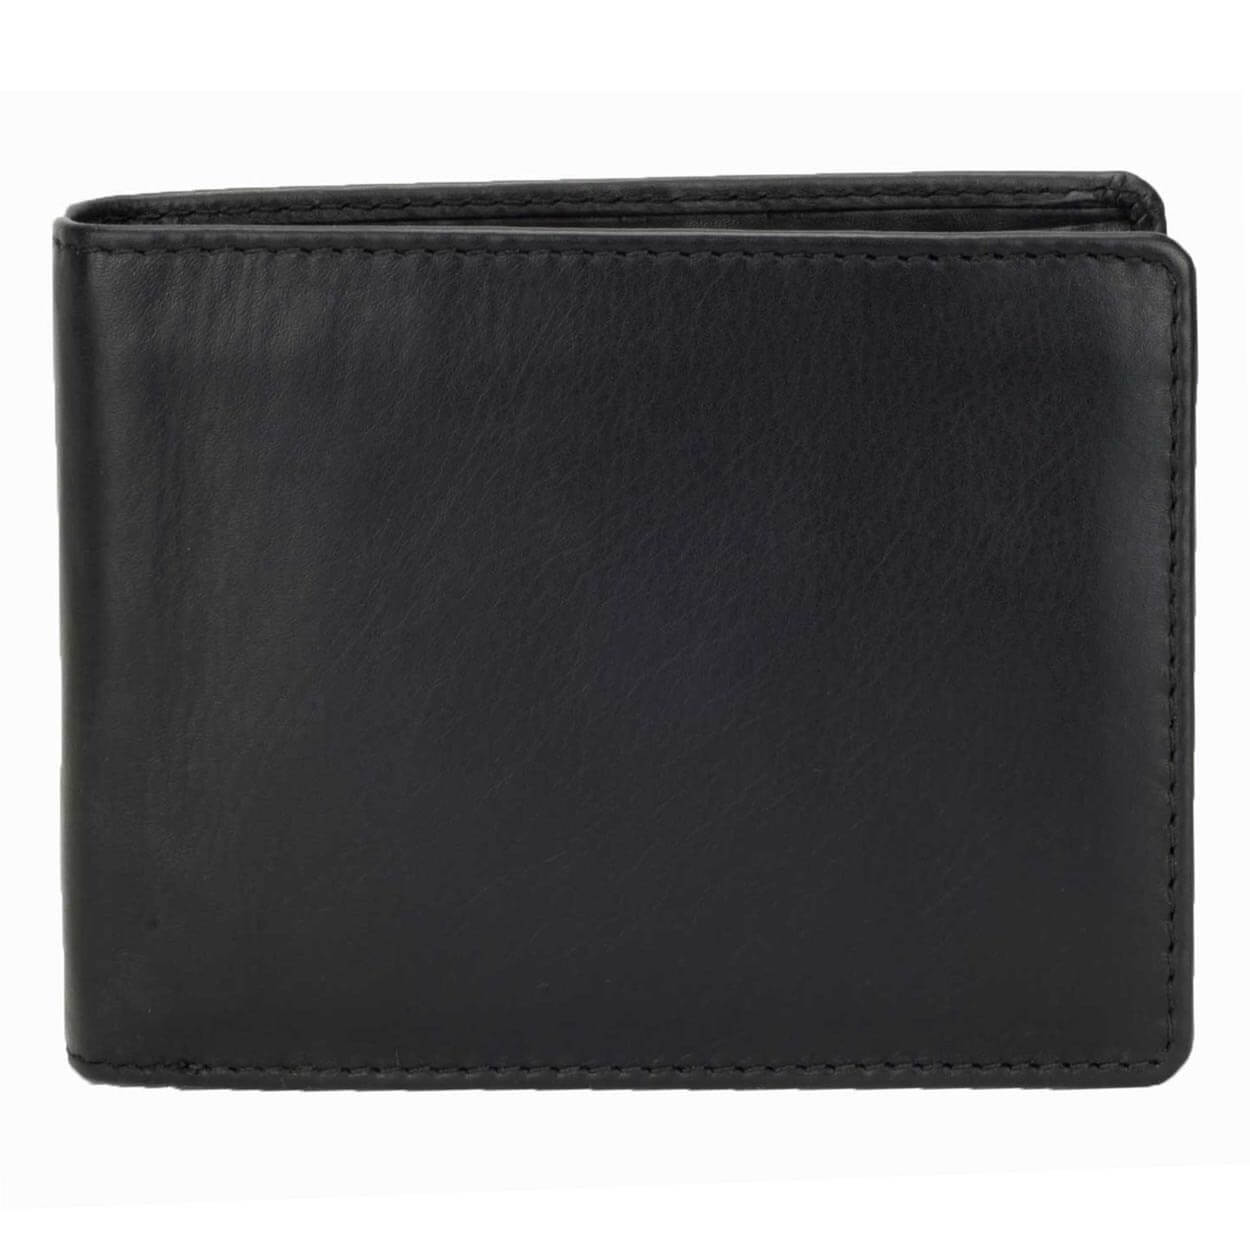 DiLoro Men's Large Bifold Leather Wallet